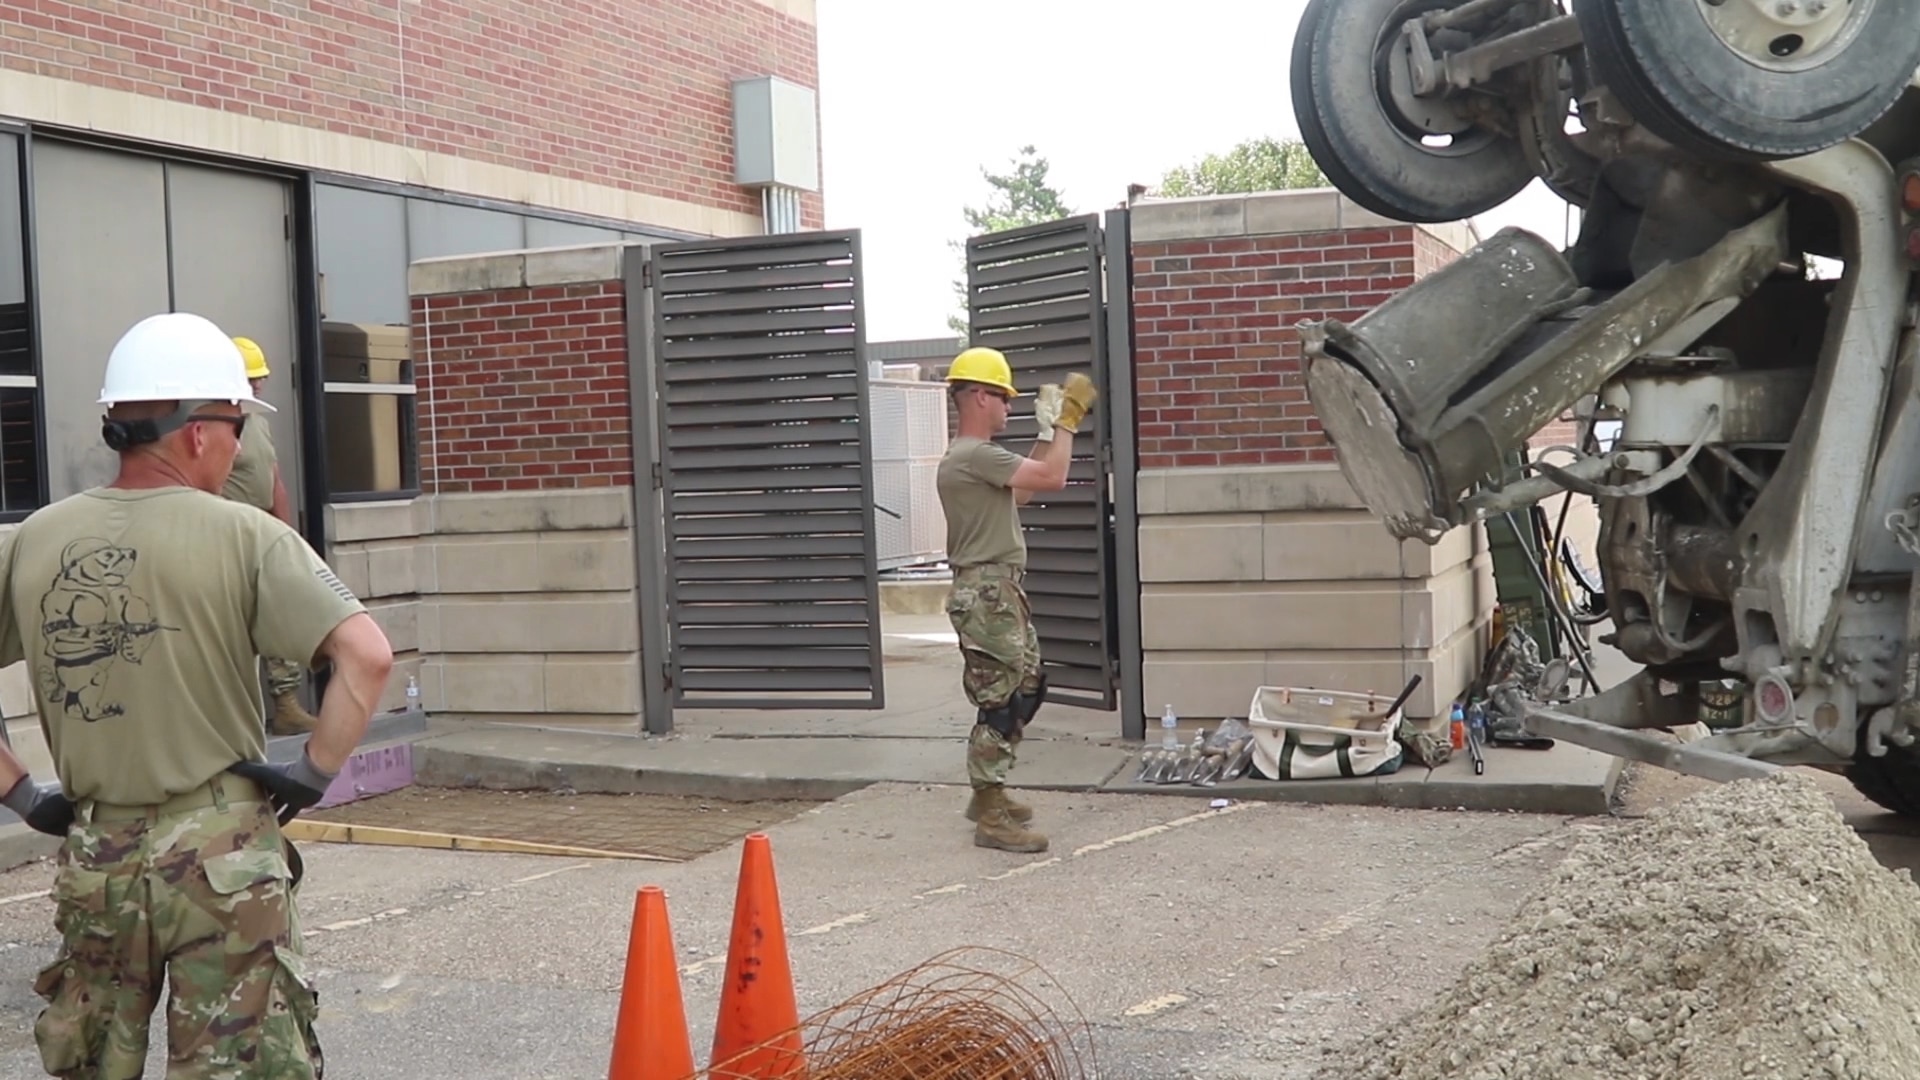 Soldiers with 2nd Platoon, Detachment 1, 226th Engineer Company out of Pittsburg, Kansas, used their skills during annual training to complete several construction projects at Forbes Field Air Force Base in Topeka for two weeks in July.